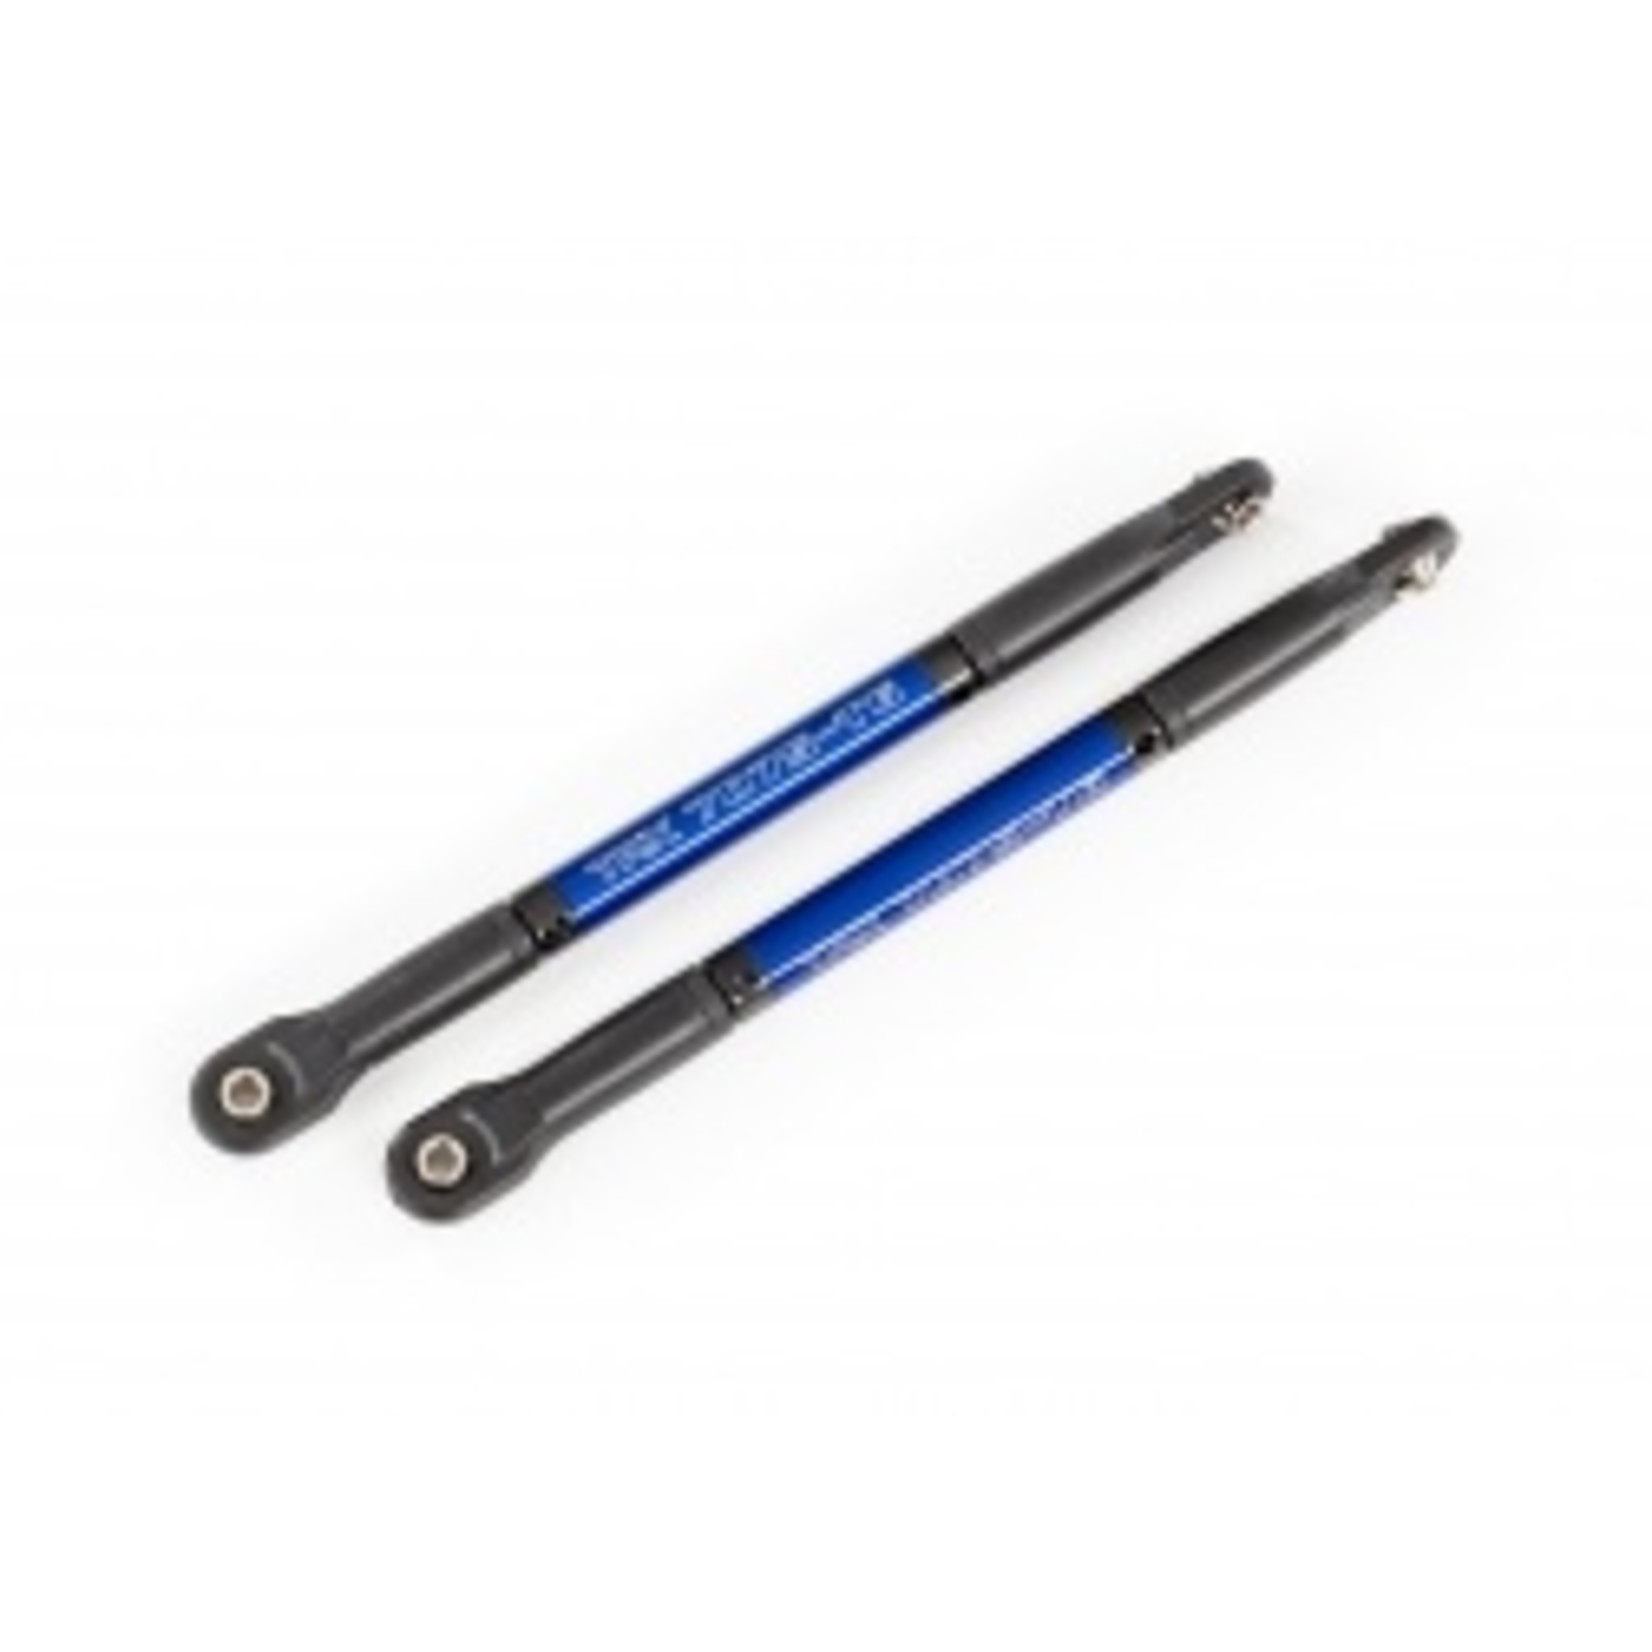 Traxxas 8619X Push rods, aluminum (blue-anodized), heavy duty (2) (assembled with rod ends and threaded inserts)